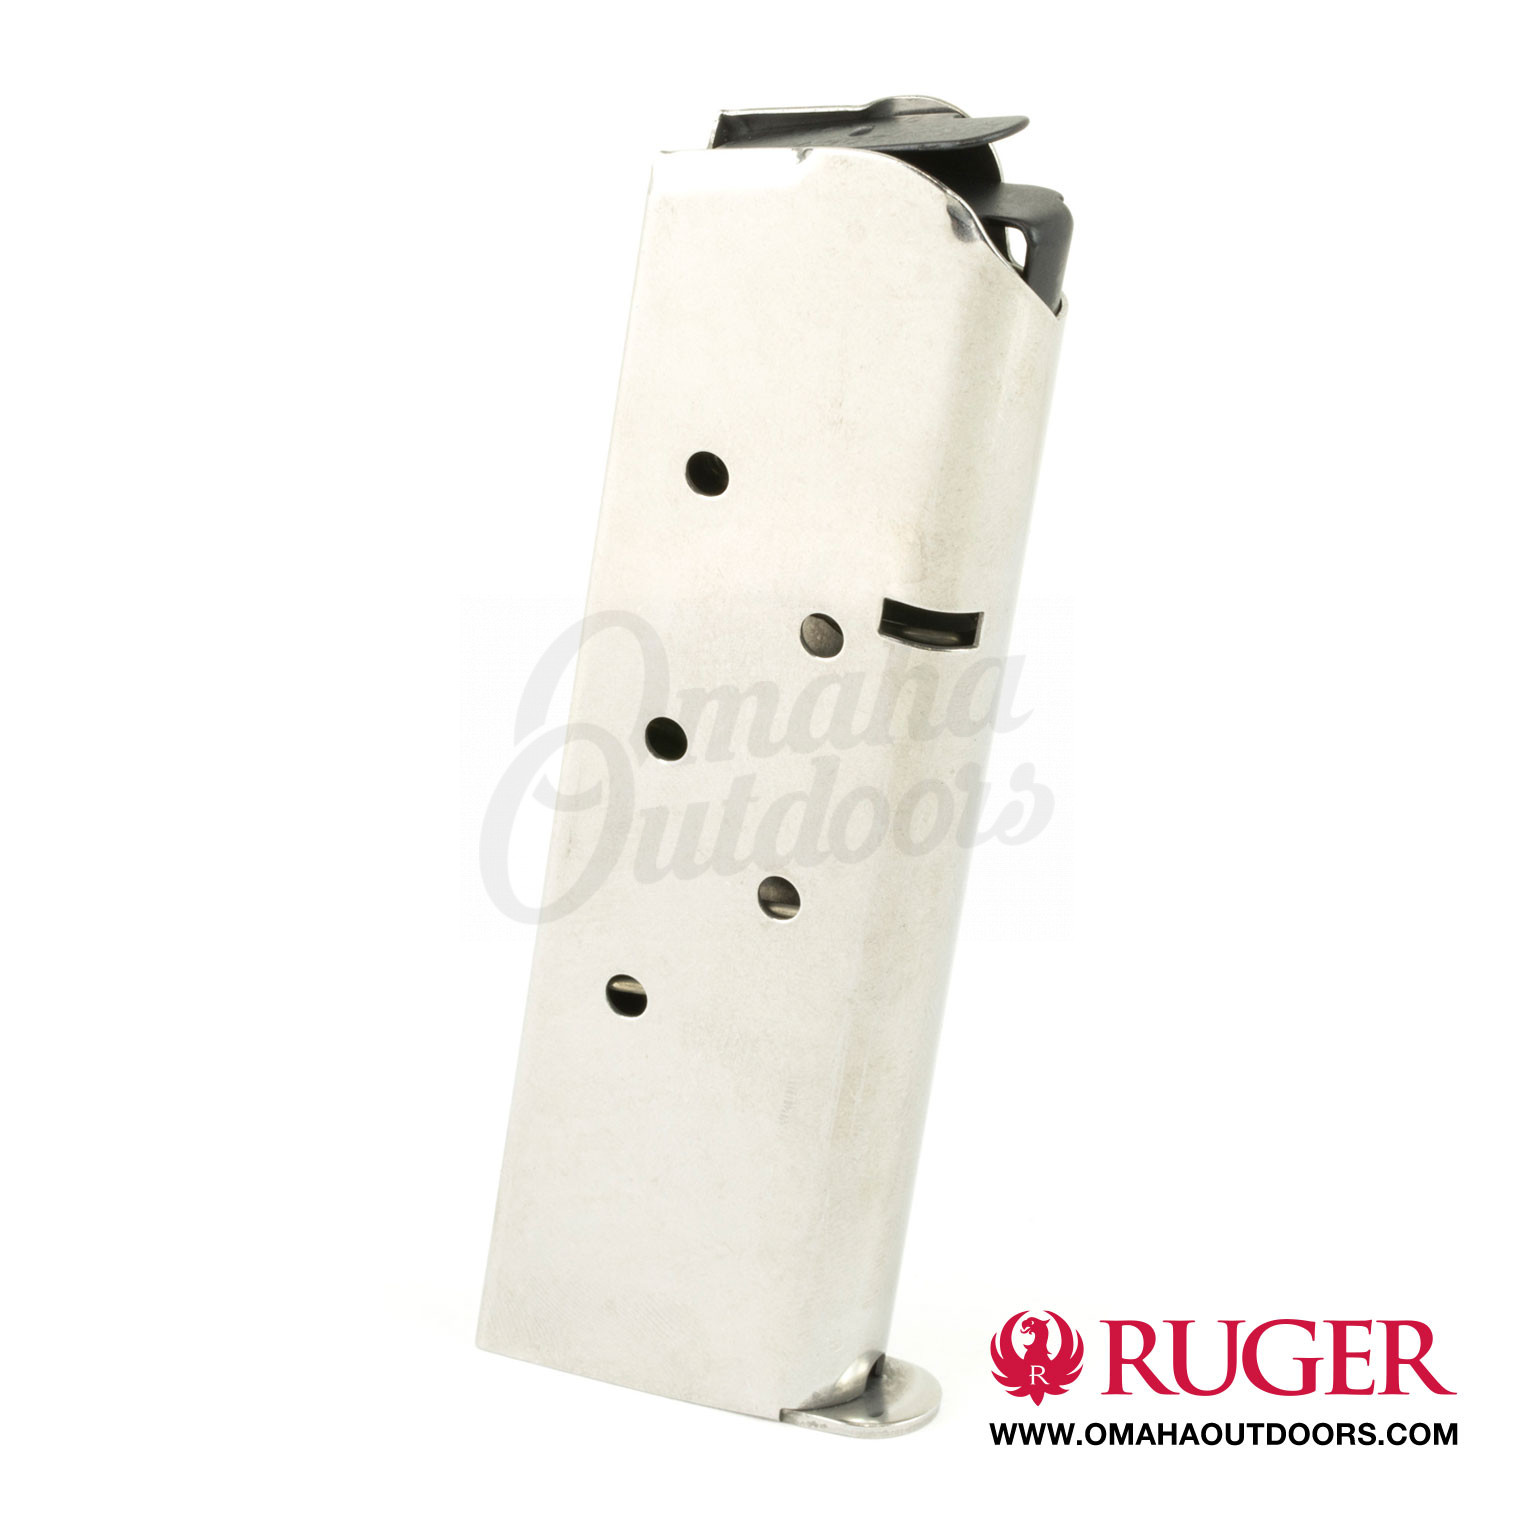 Details about   Ruger SR1911 .45 ACP Magazine Seven Rounds Stainless Steel 90366 